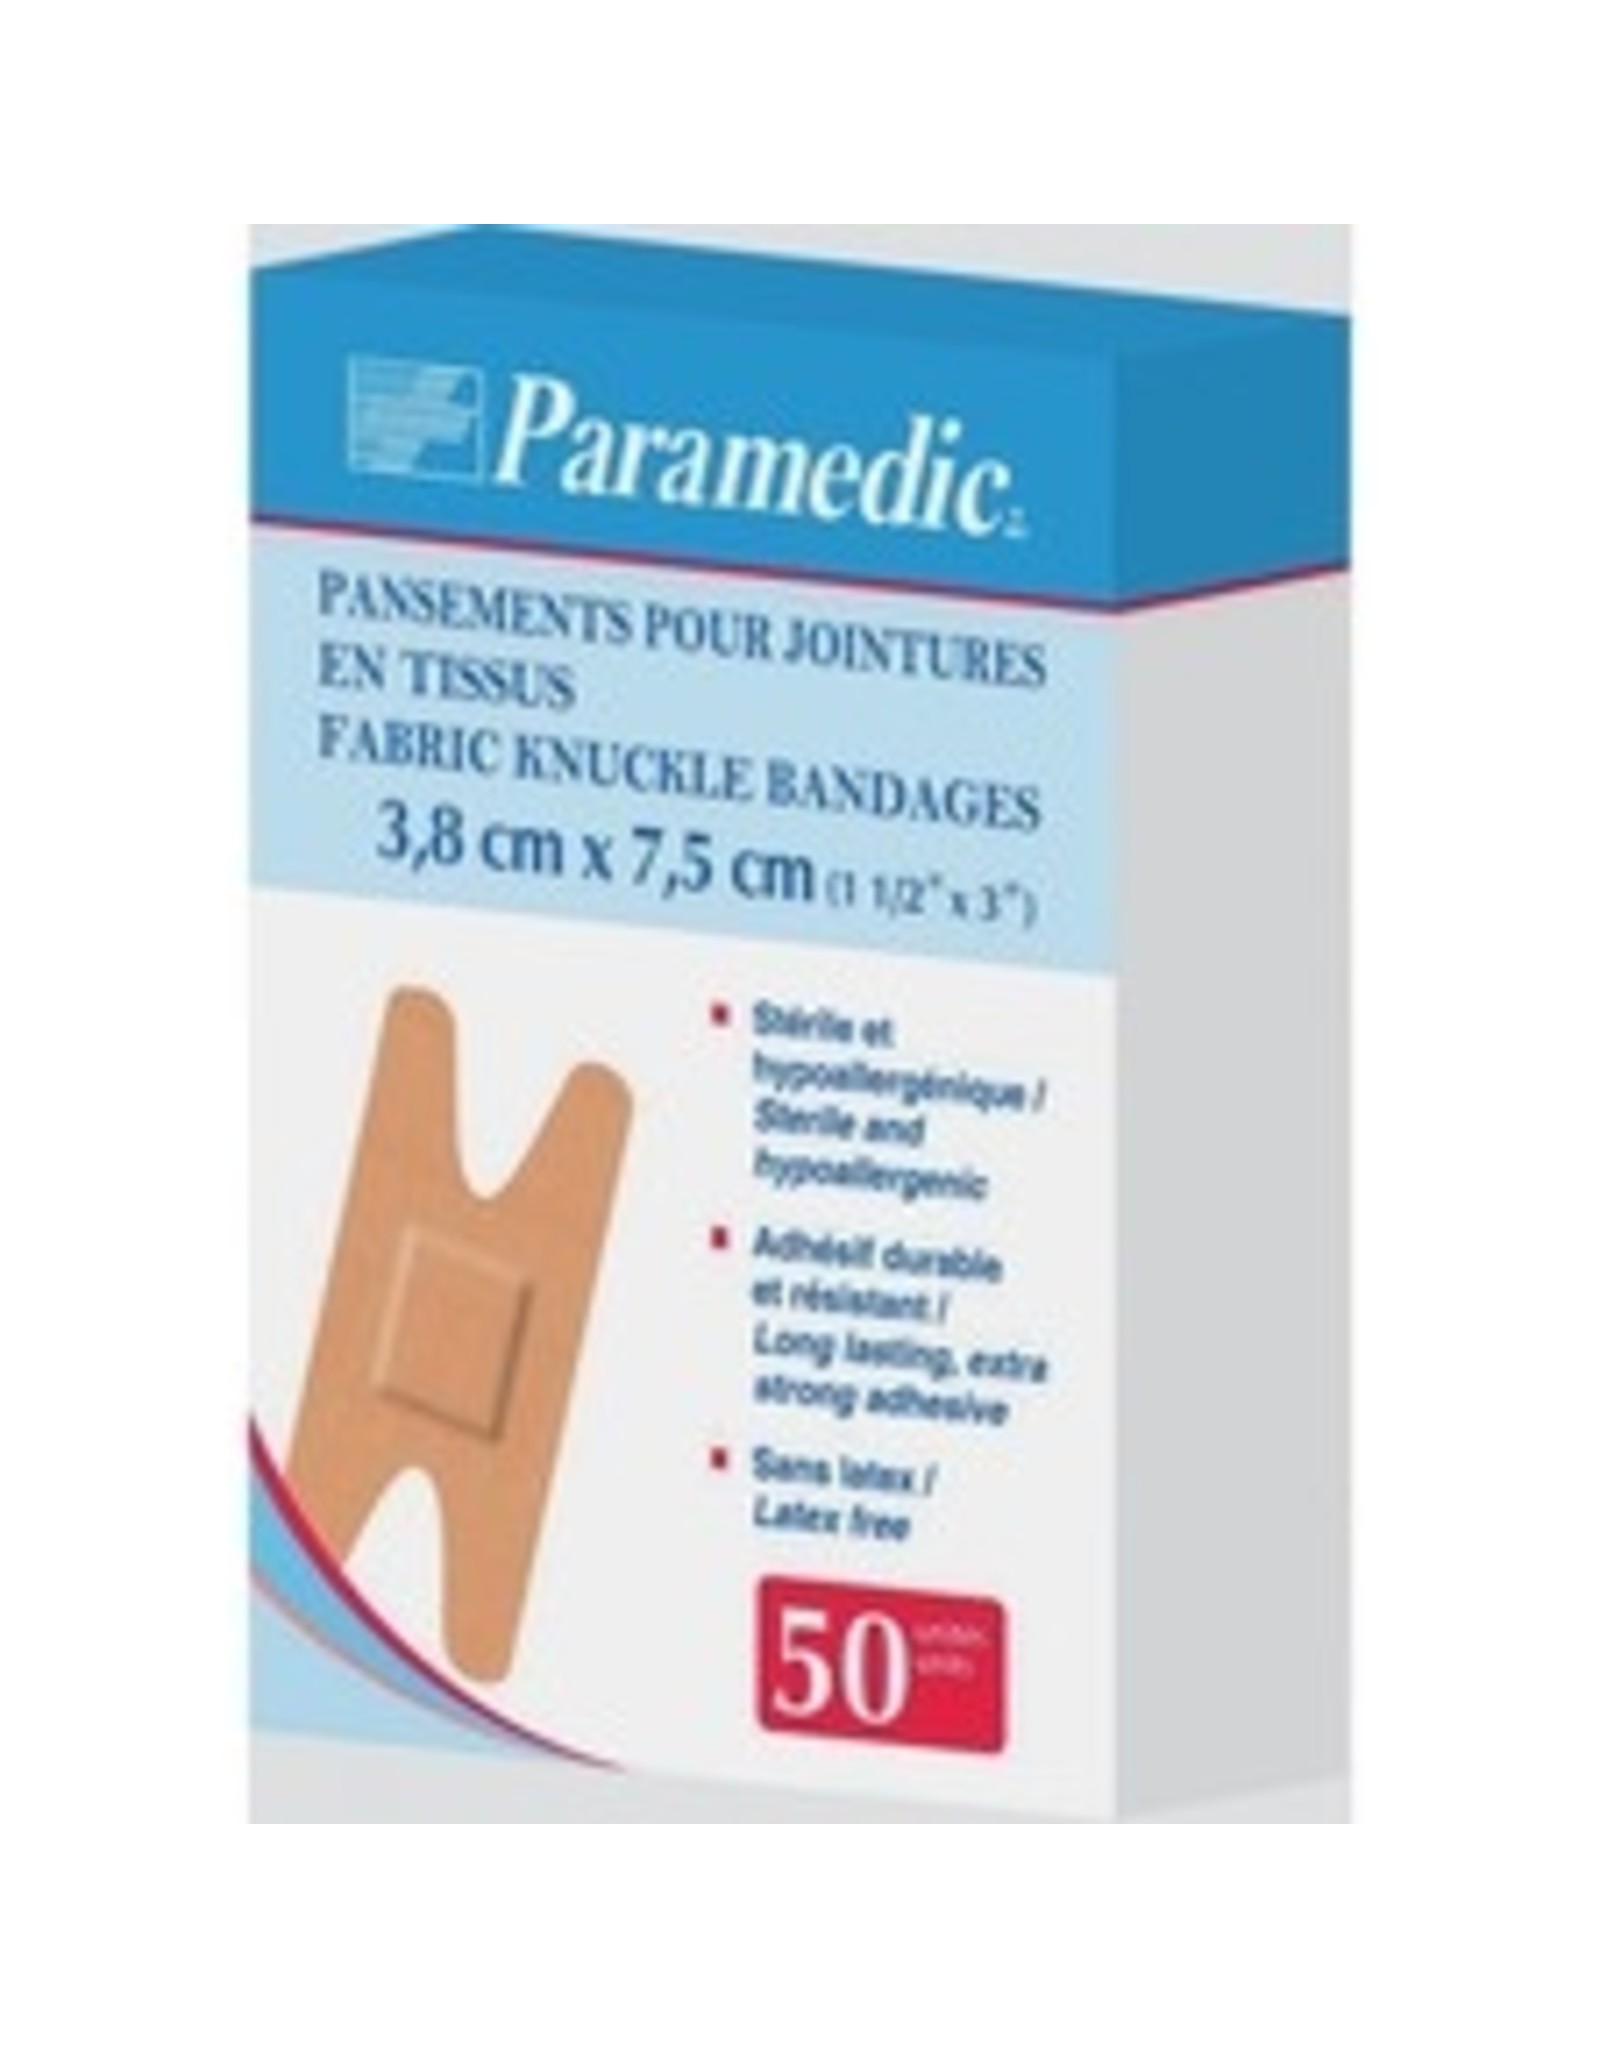 BANDAGES FABRIC KNUCKLES,50/PK